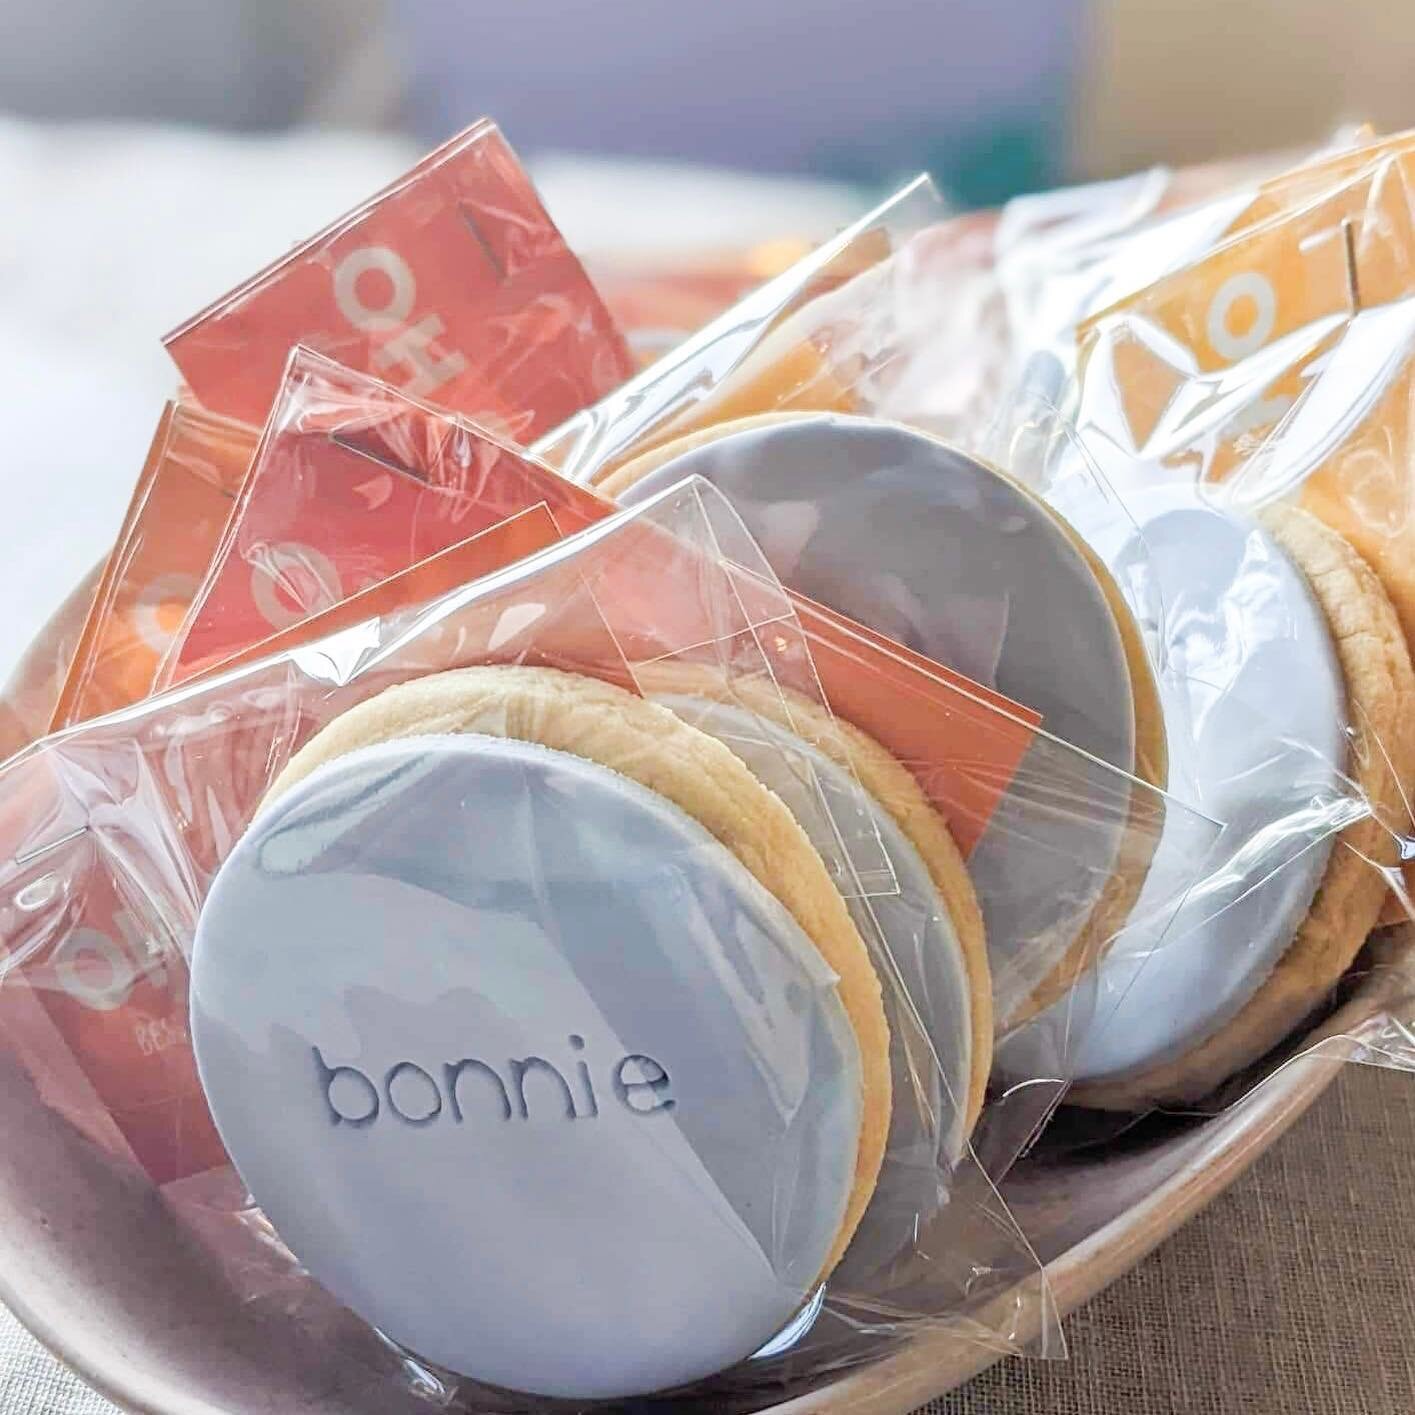 Did you know you can have your branding/logo embossed on a cookie? These make such great client gifts or the perfect thank you prezzie! 

Flick me a message to start brainstorming! 🍪